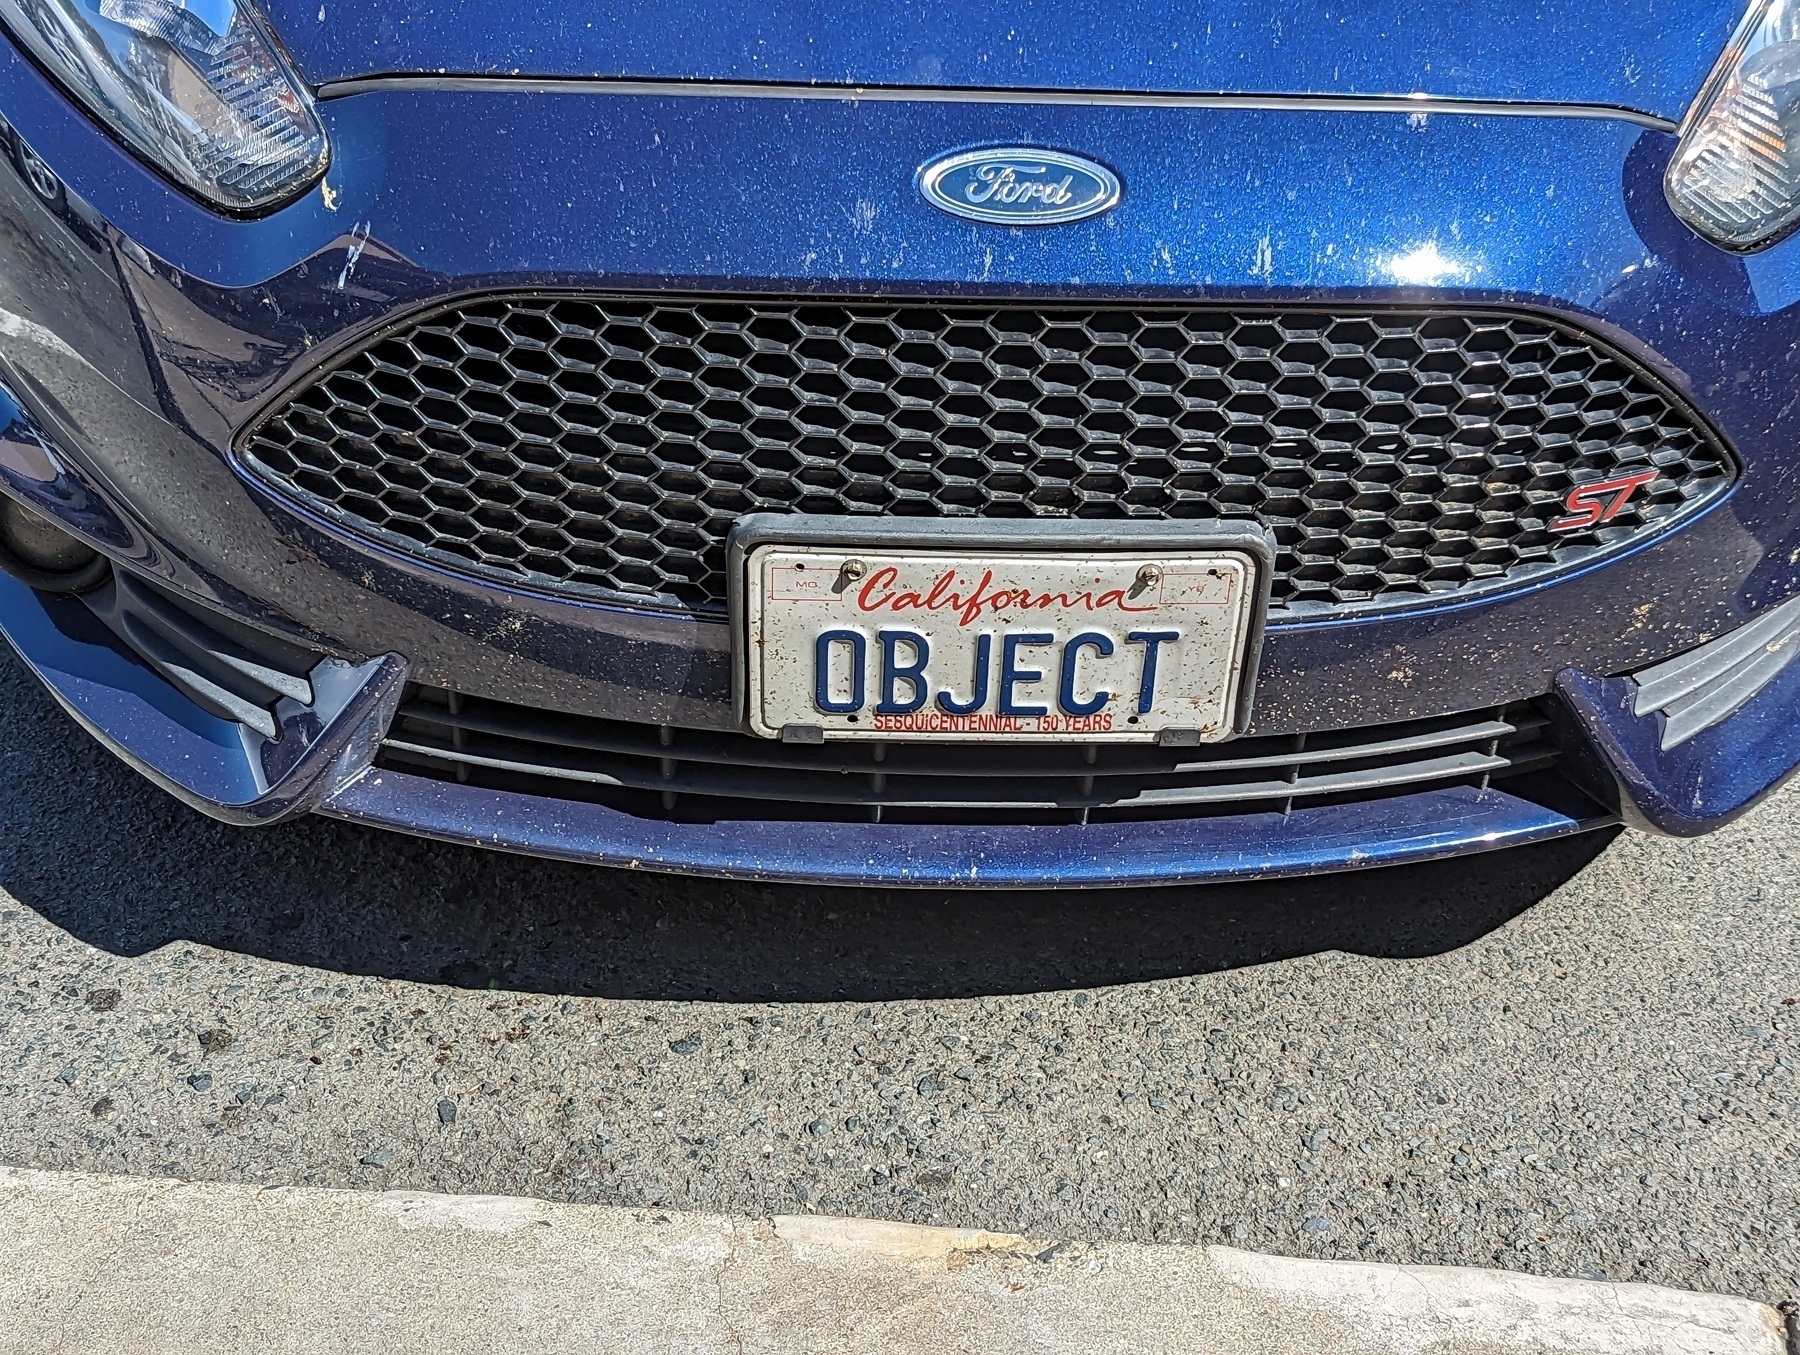 A custom California license plate with the word 'OBJECT' sits on the front end of a blue Ford sedan in the parking lot outside a Whole Foods Market store Saturday, May 13, 2023 in Walnut Creek, California.